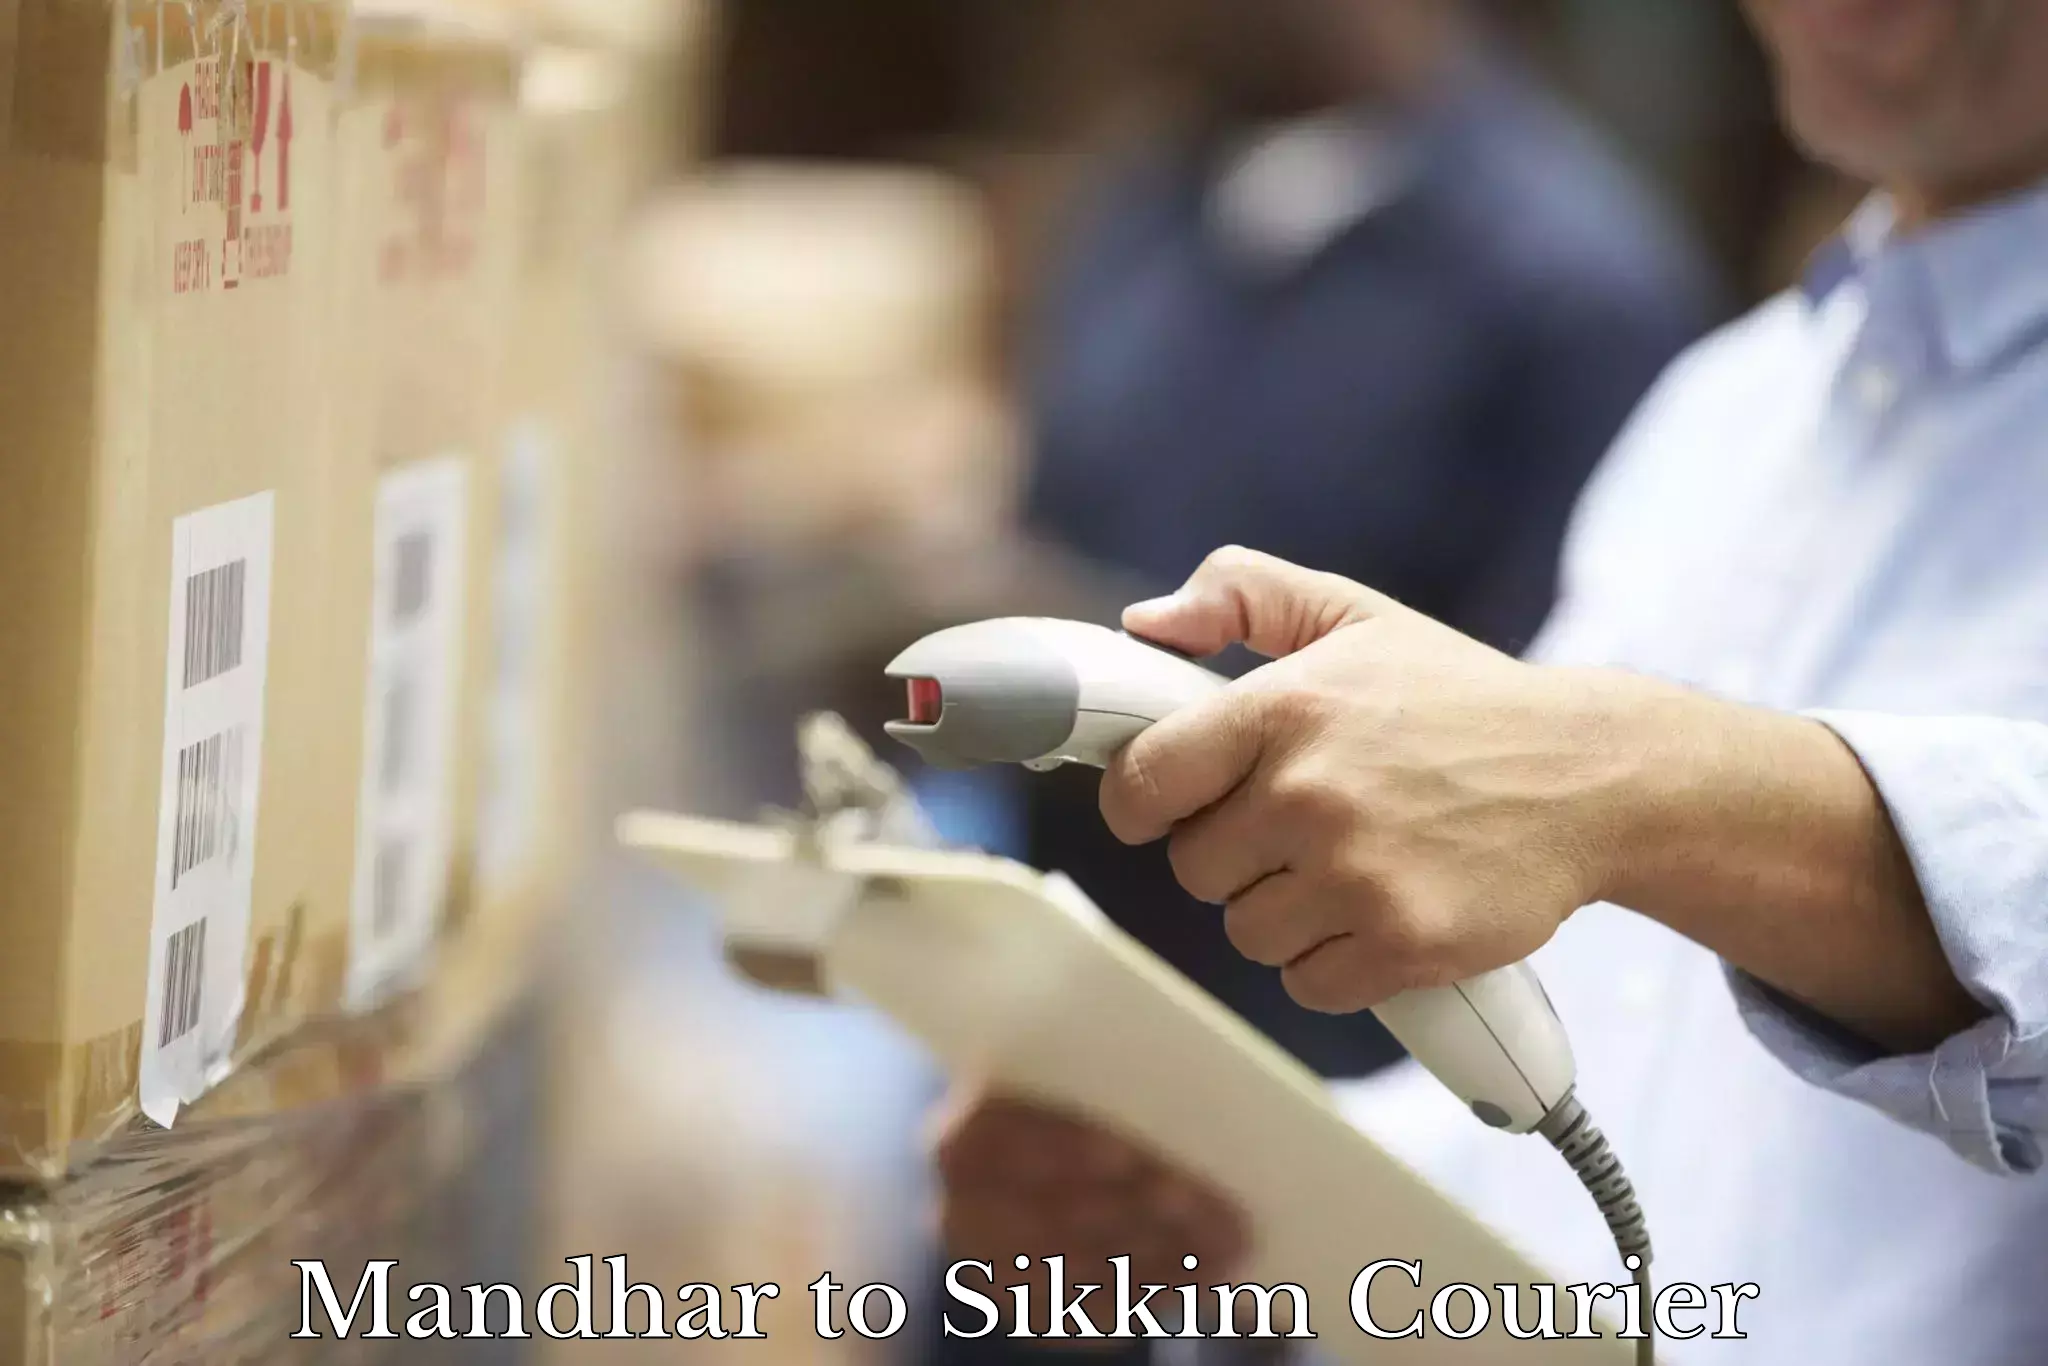 Cash on delivery service Mandhar to South Sikkim